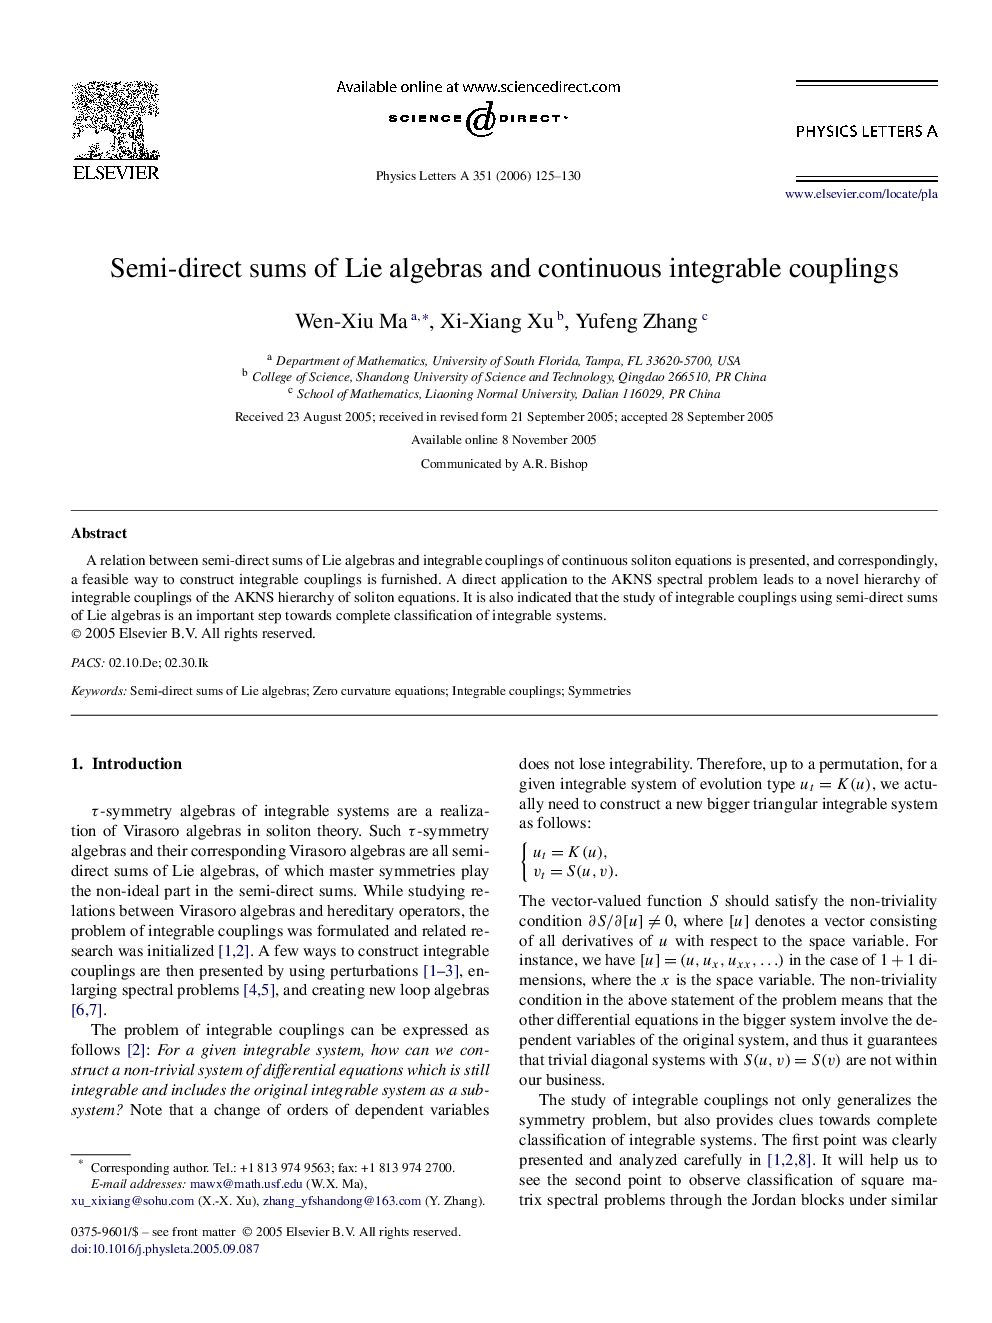 Semi-direct sums of Lie algebras and continuous integrable couplings